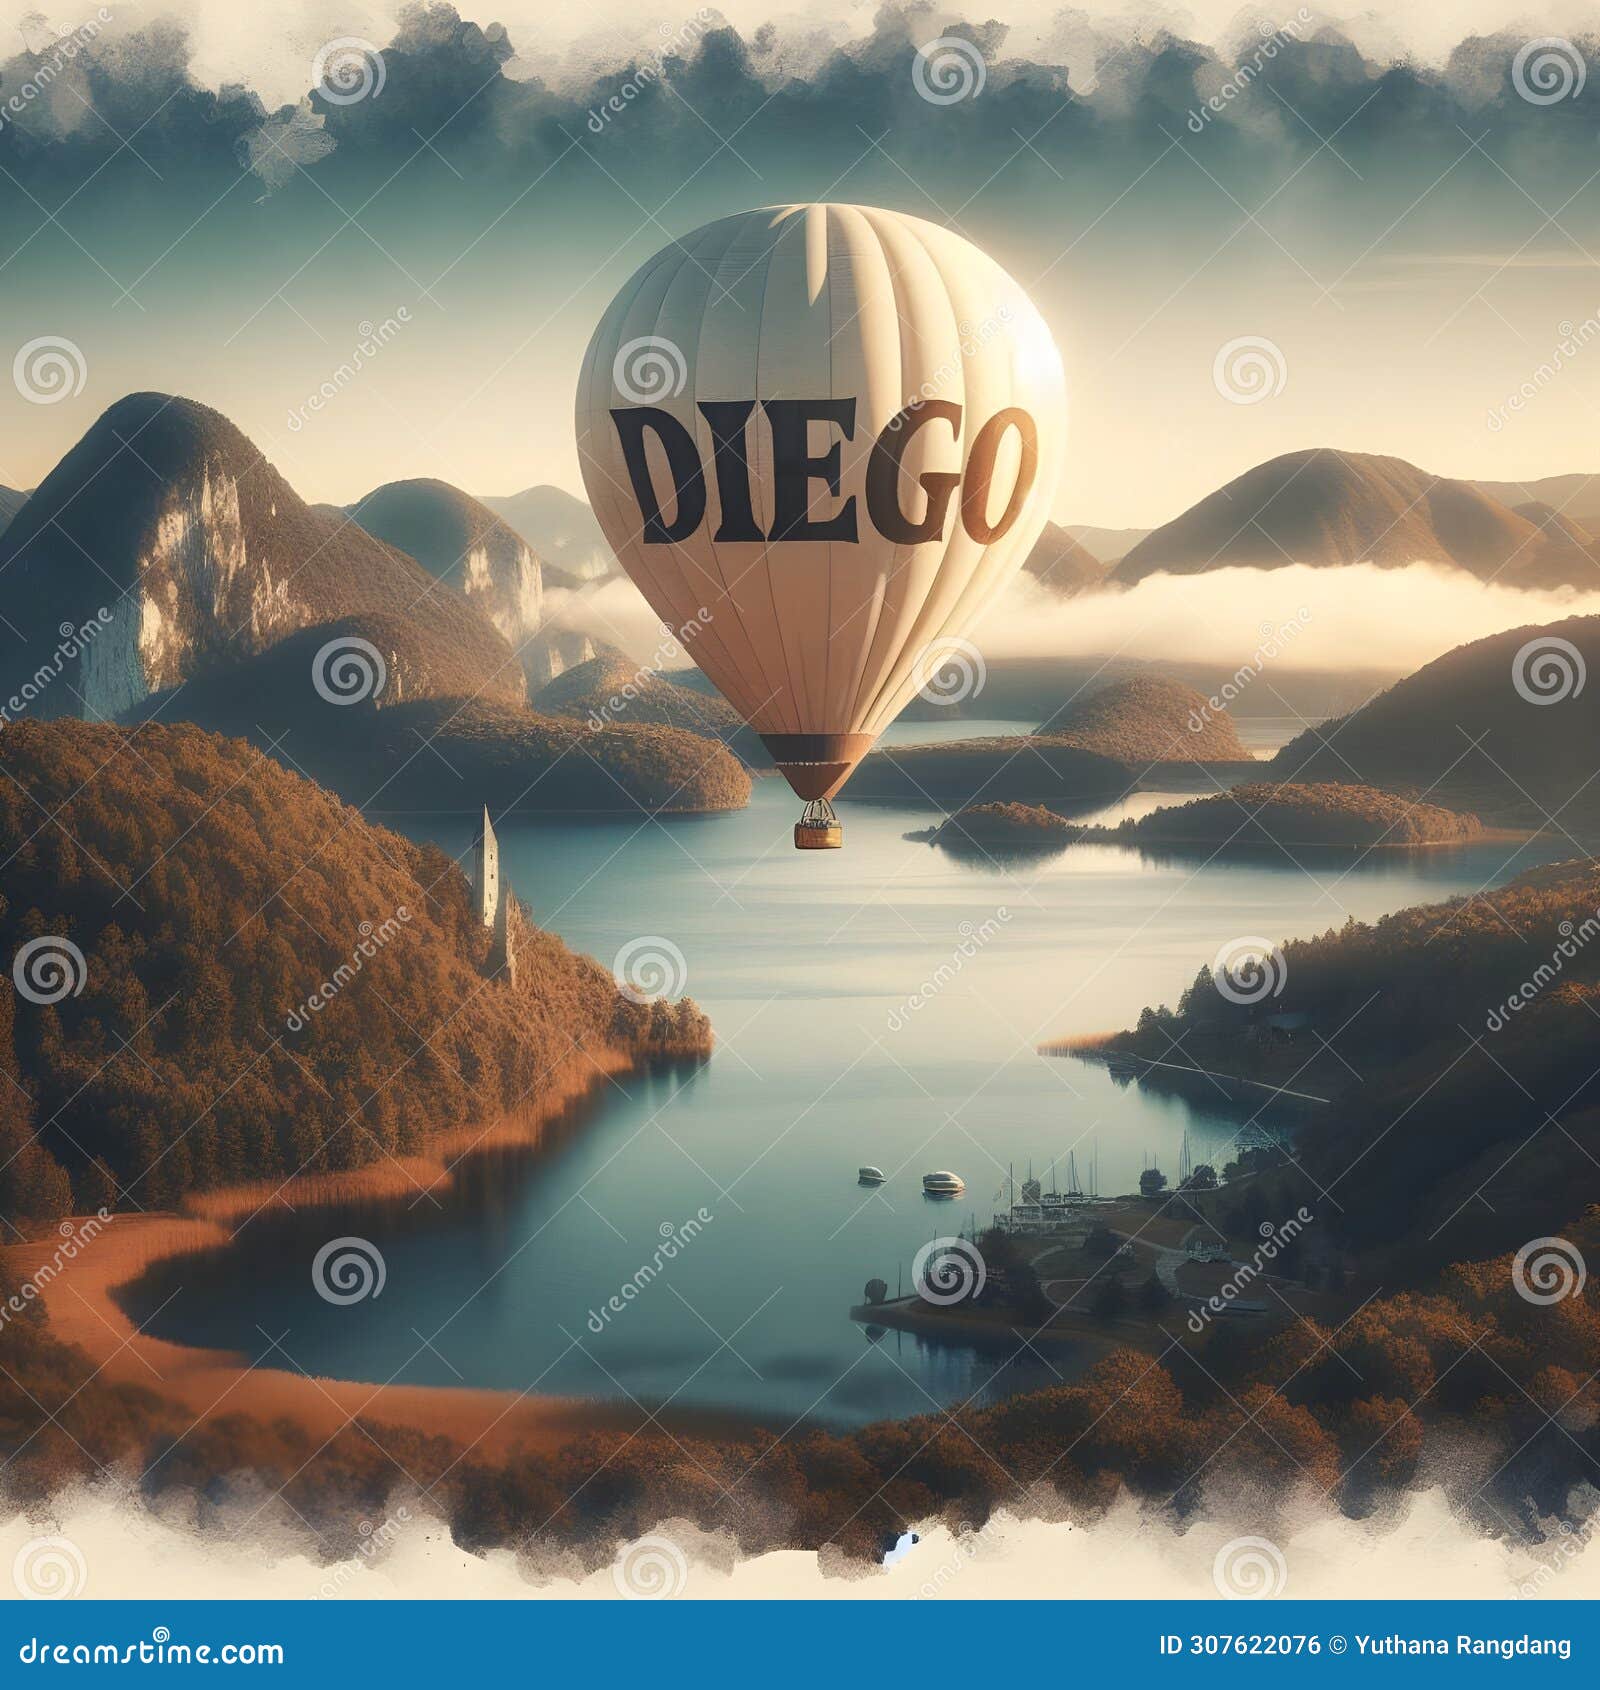 texto name diego watercolor of a off white hot air balloon.